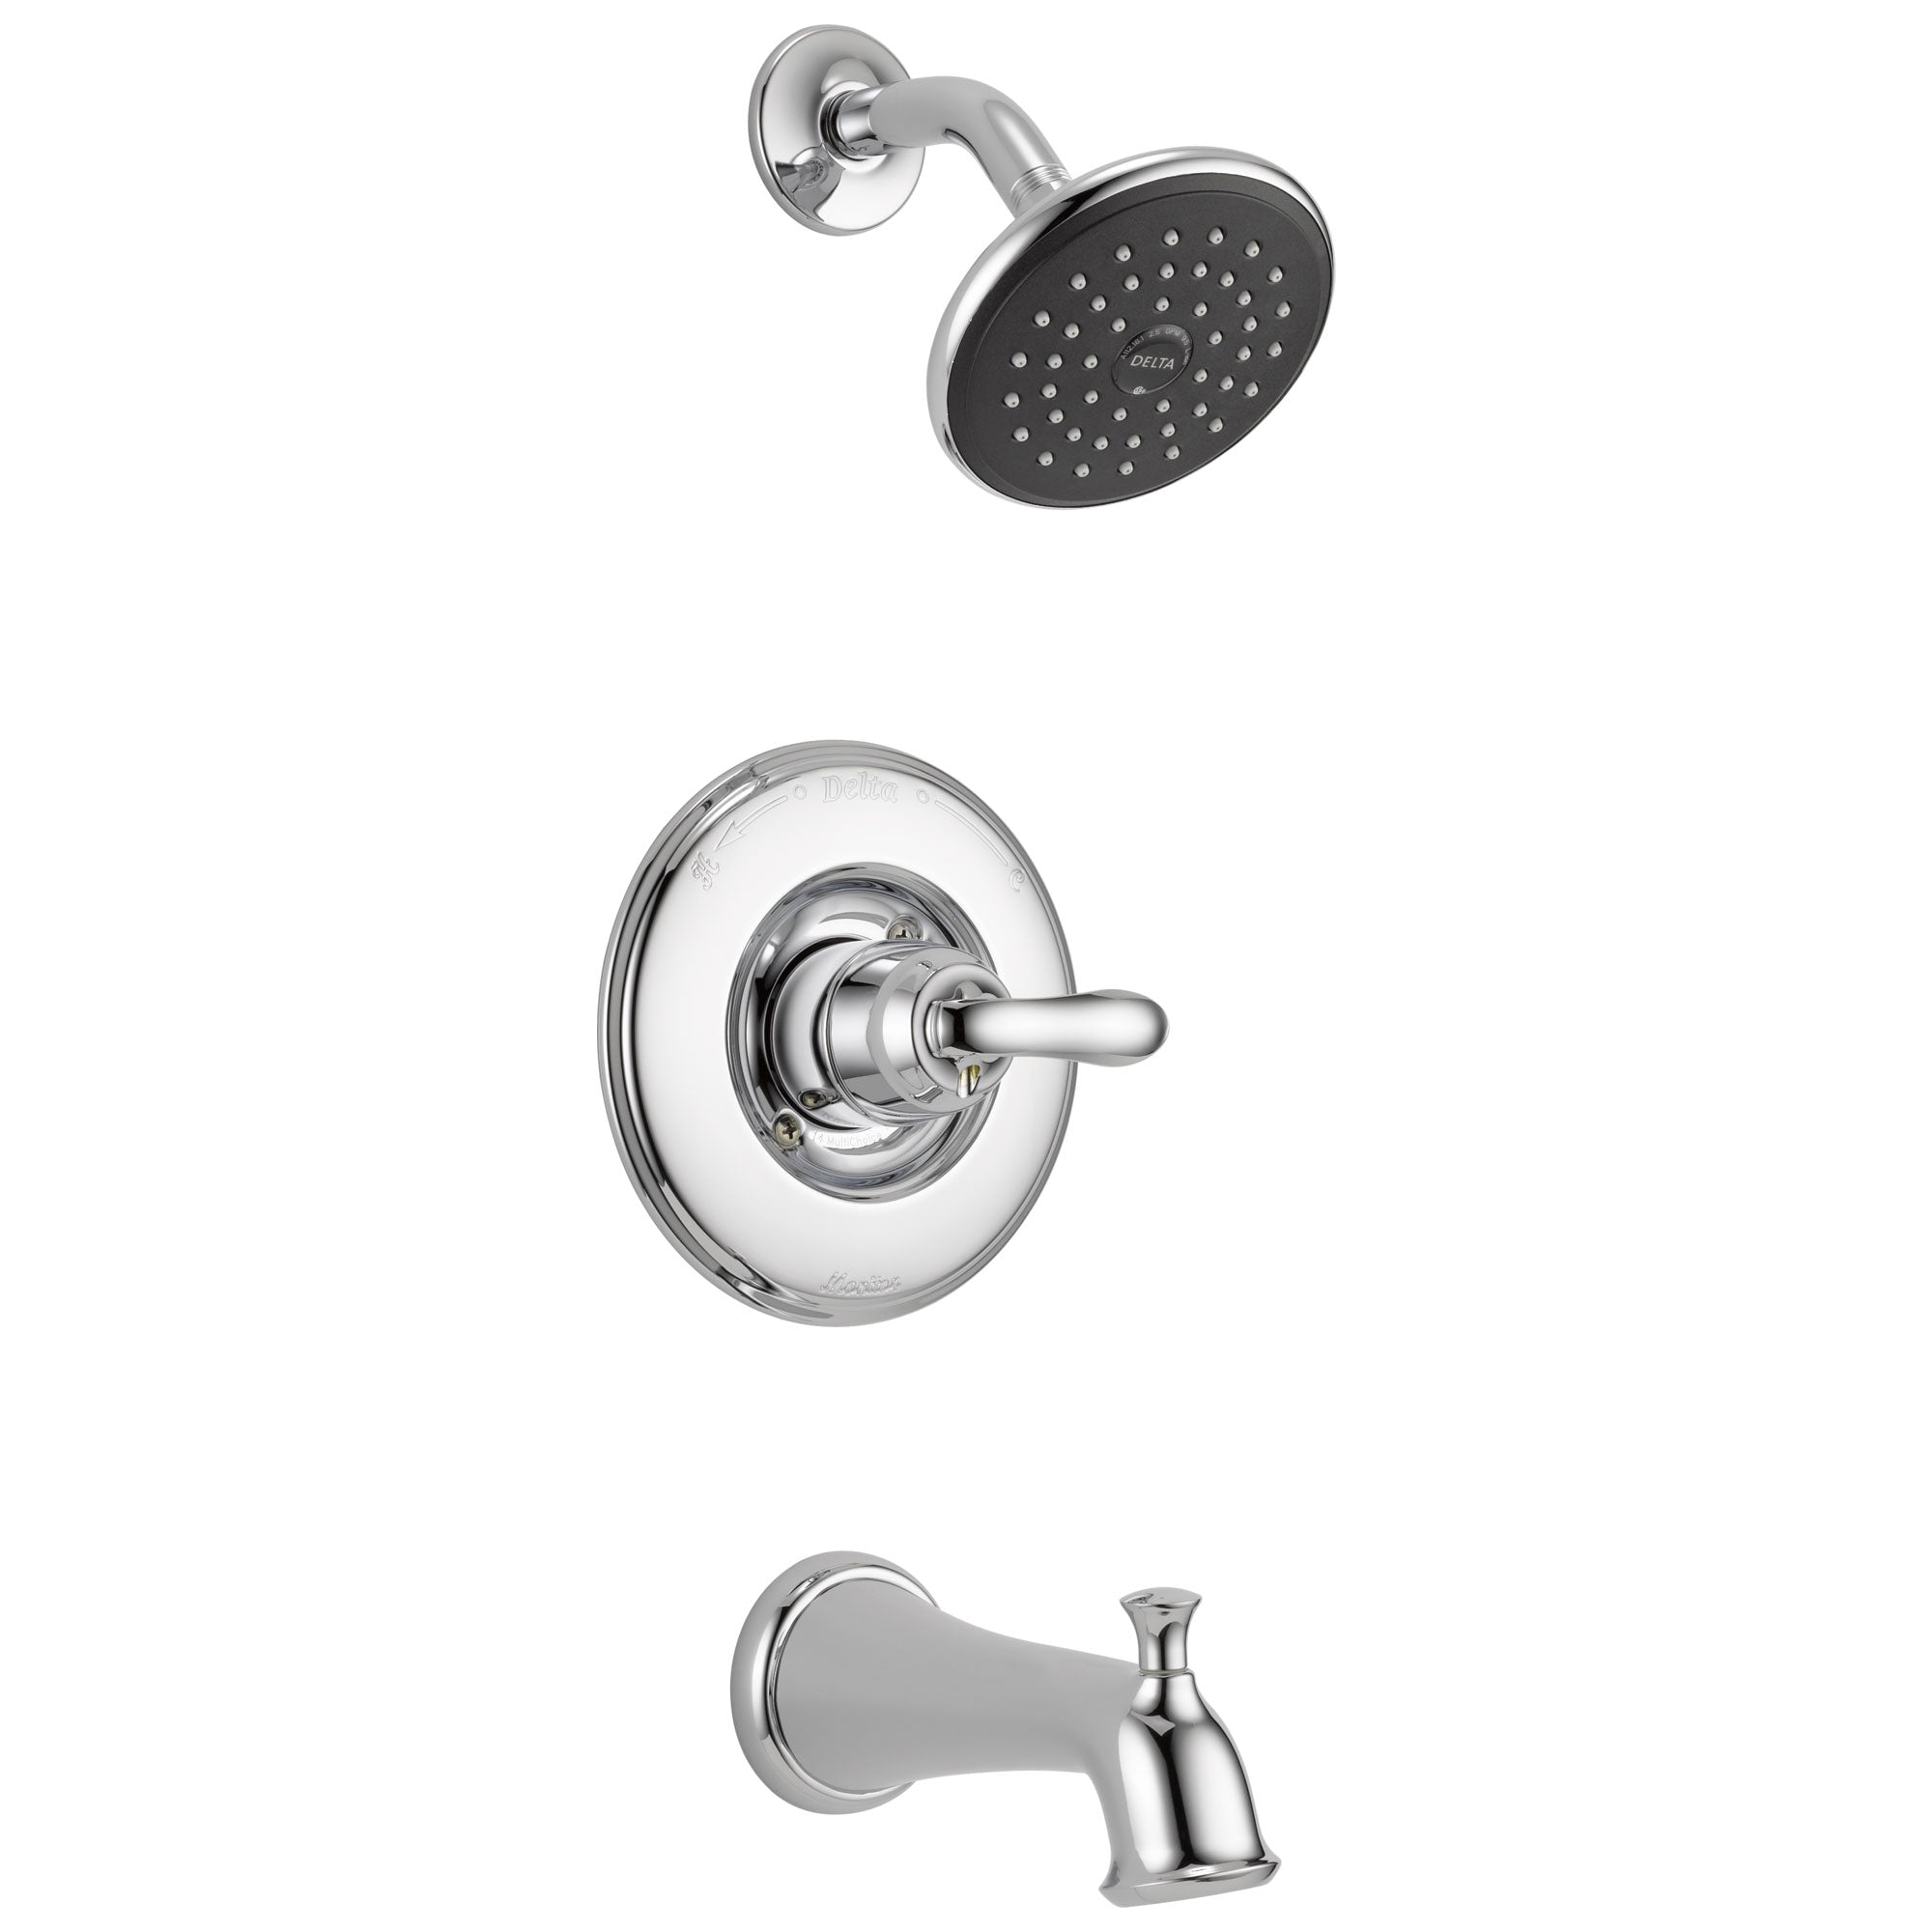 Delta Linden Collection Chrome Finish Monitor 14 Series Tub and Shower Combo Faucet Includes Trim Kit Rough Valve with Stops D2364V